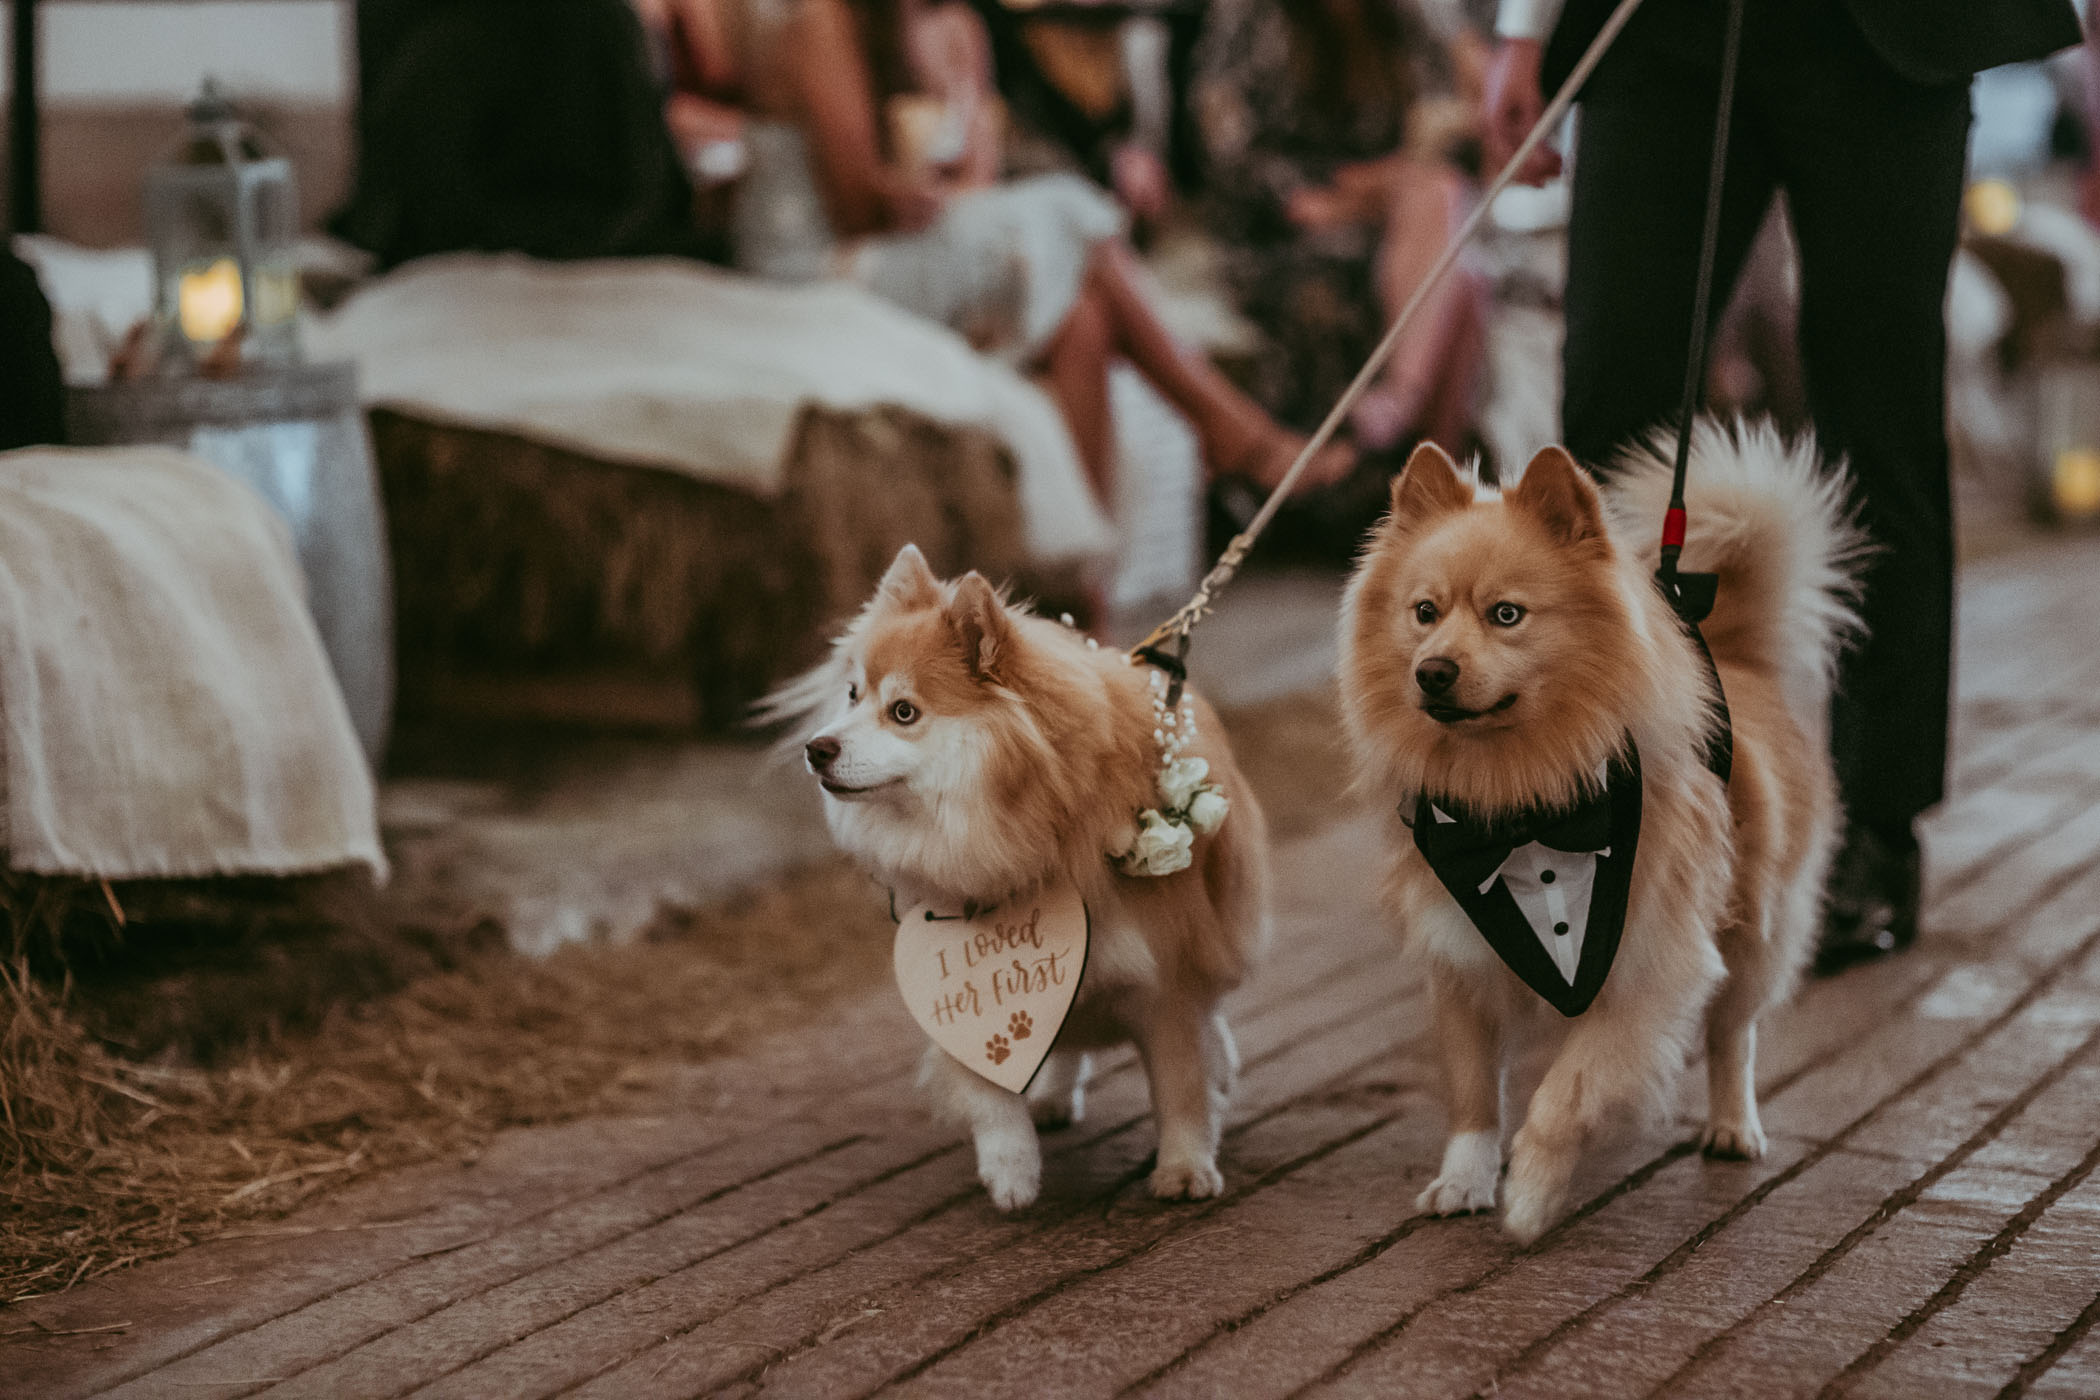 wedding pups in tux and sign